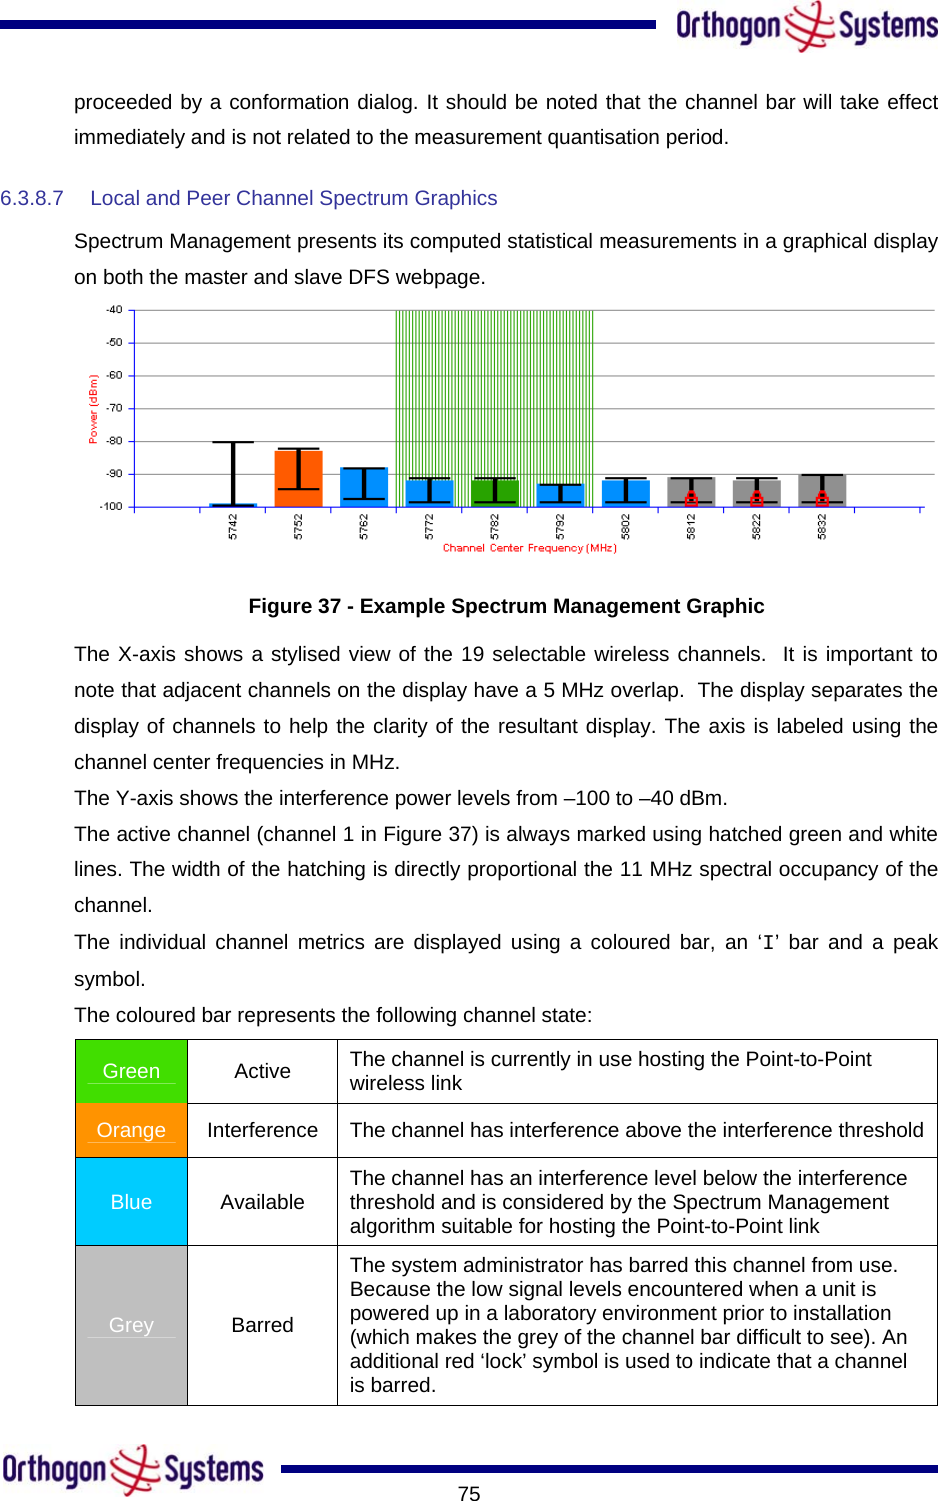       75proceeded by a conformation dialog. It should be noted that the channel bar will take effect immediately and is not related to the measurement quantisation period. 6.3.8.7  Local and Peer Channel Spectrum Graphics Spectrum Management presents its computed statistical measurements in a graphical display on both the master and slave DFS webpage.   Figure 37 - Example Spectrum Management Graphic The X-axis shows a stylised view of the 19 selectable wireless channels.  It is important to note that adjacent channels on the display have a 5 MHz overlap.  The display separates the display of channels to help the clarity of the resultant display. The axis is labeled using the channel center frequencies in MHz. The Y-axis shows the interference power levels from –100 to –40 dBm.  The active channel (channel 1 in Figure 37) is always marked using hatched green and white lines. The width of the hatching is directly proportional the 11 MHz spectral occupancy of the channel. The individual channel metrics are displayed using a coloured bar, an ‘I’ bar and a peak symbol. The coloured bar represents the following channel state: Green  Active  The channel is currently in use hosting the Point-to-Point wireless link Orange  Interference  The channel has interference above the interference threshold Blue  Available  The channel has an interference level below the interference threshold and is considered by the Spectrum Management algorithm suitable for hosting the Point-to-Point link Grey  Barred The system administrator has barred this channel from use. Because the low signal levels encountered when a unit is powered up in a laboratory environment prior to installation (which makes the grey of the channel bar difficult to see). An additional red ‘lock’ symbol is used to indicate that a channel is barred. 